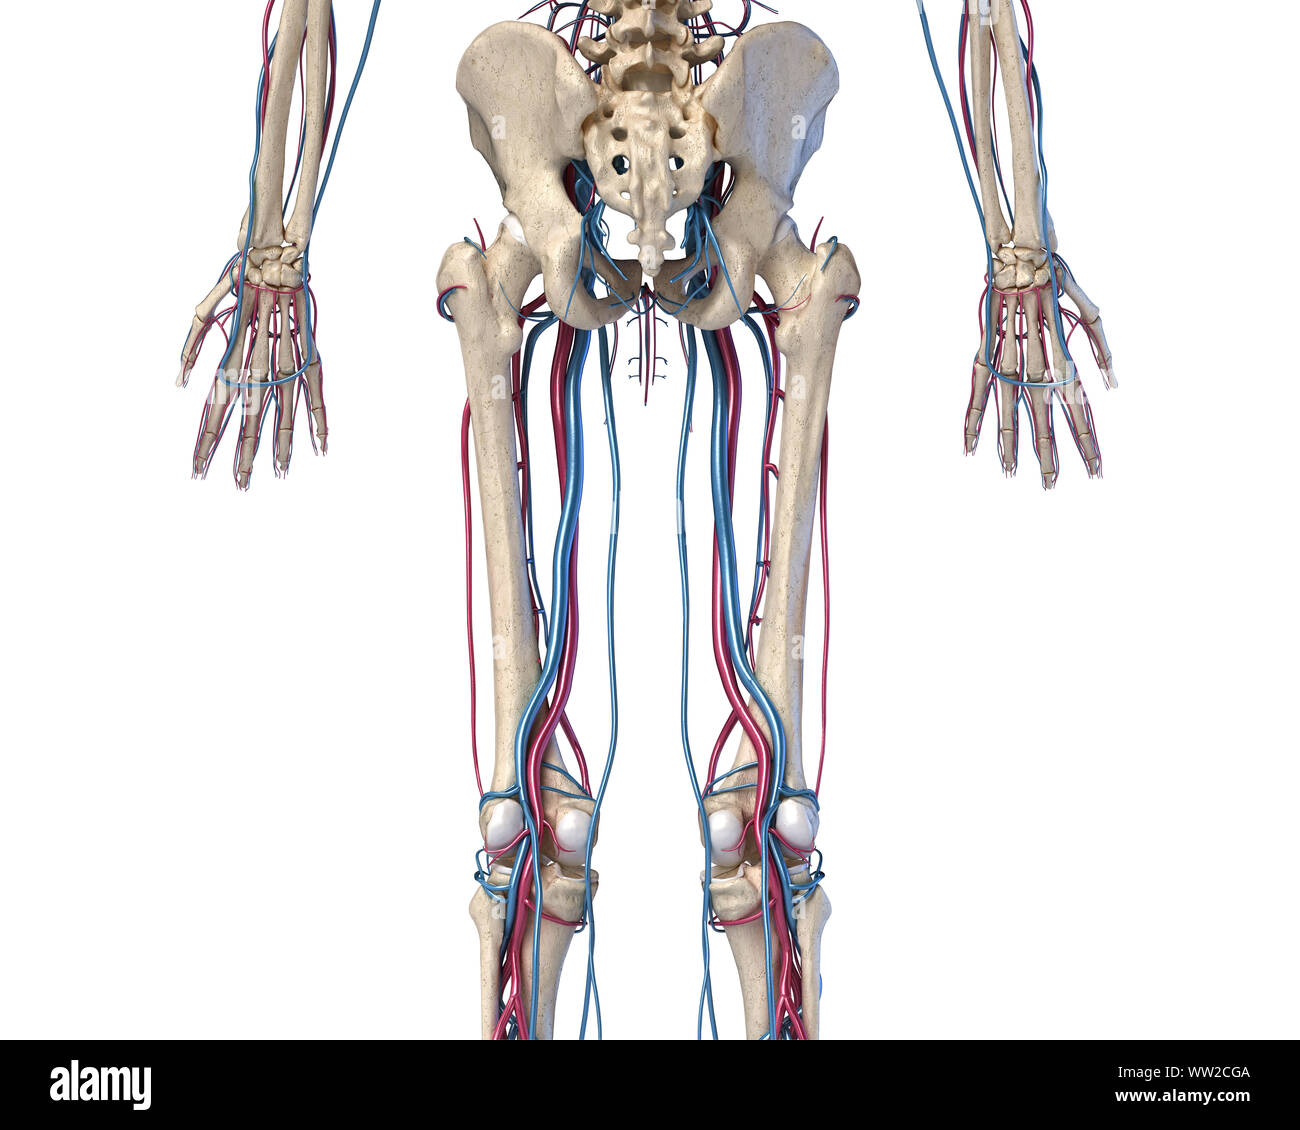 Human body anatomy. 3d illustration of Hip, legs and hands skeletal and cardiovascular systems. Viewed from the back. On white background. Stock Photo